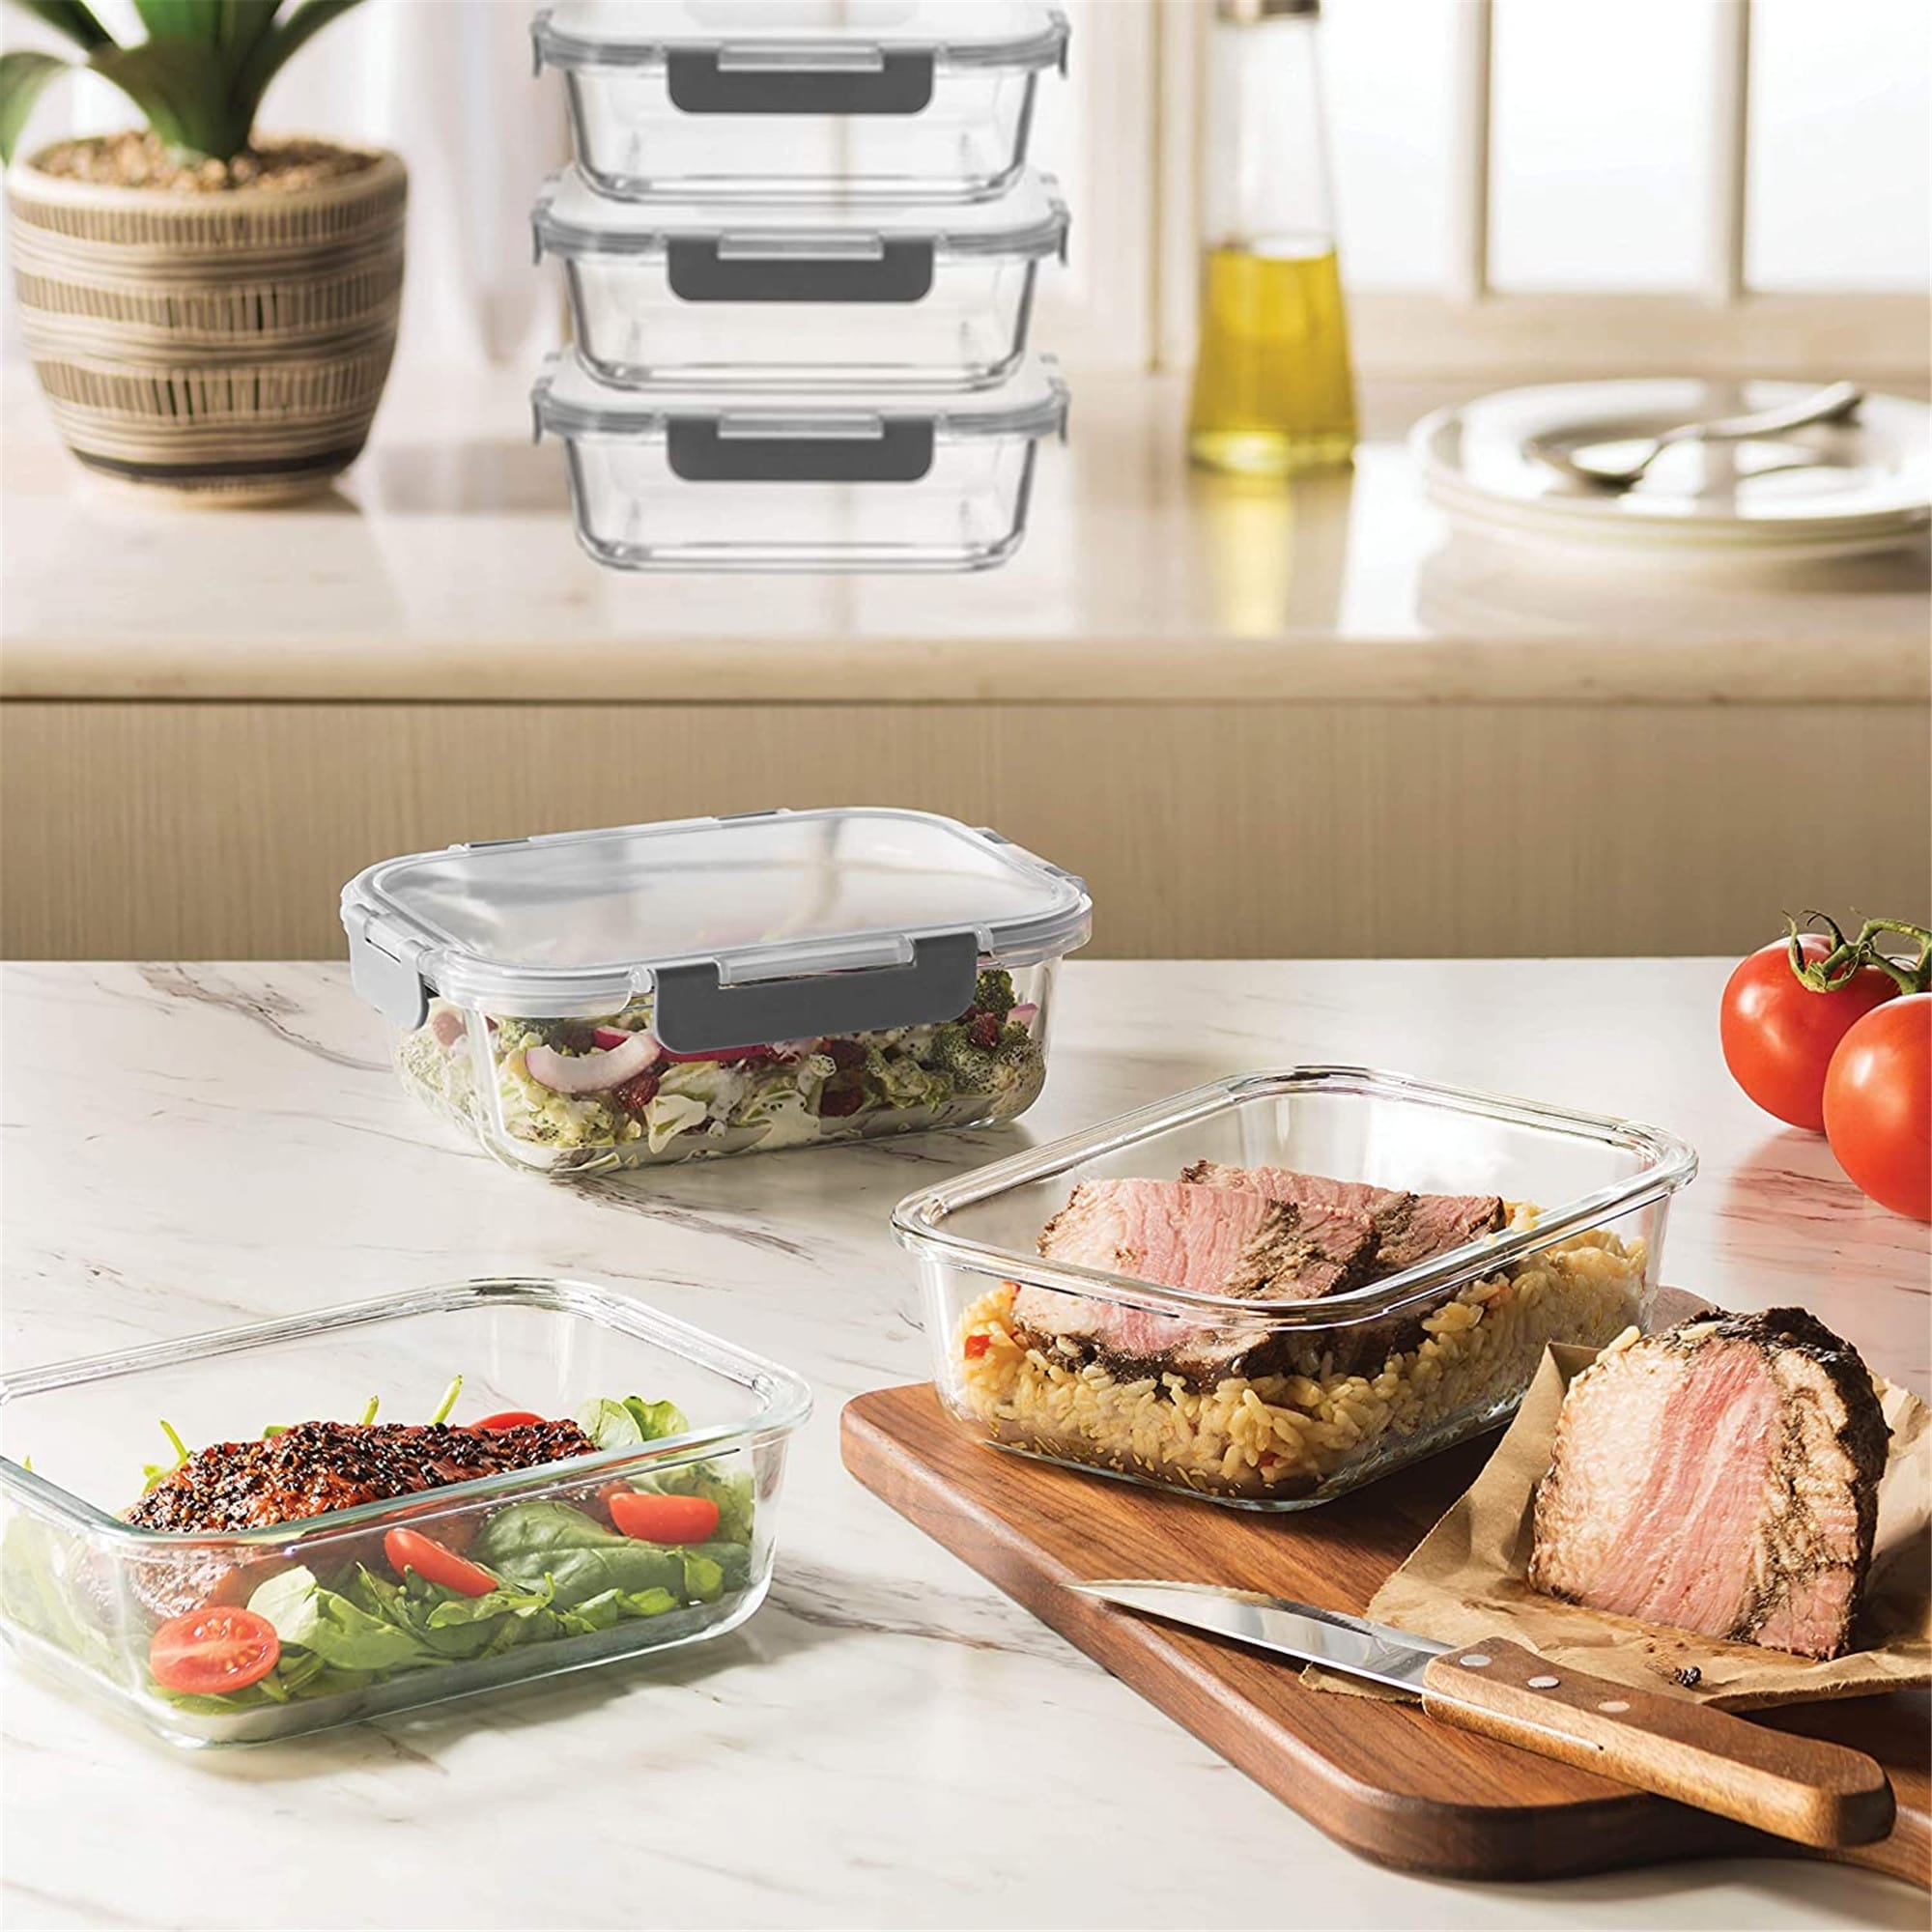 https://ak1.ostkcdn.com/images/products/is/images/direct/05e5eee61abaa7f3a39bfc692cfc177c249b0e5d/Superior-Glass-Meal-Prep-Containers---6-pack-%2835oz%29-Newly-Innovated-Hinged-BPA-free-Locking-lids---100%25-Leak-Proof-Glass.jpg